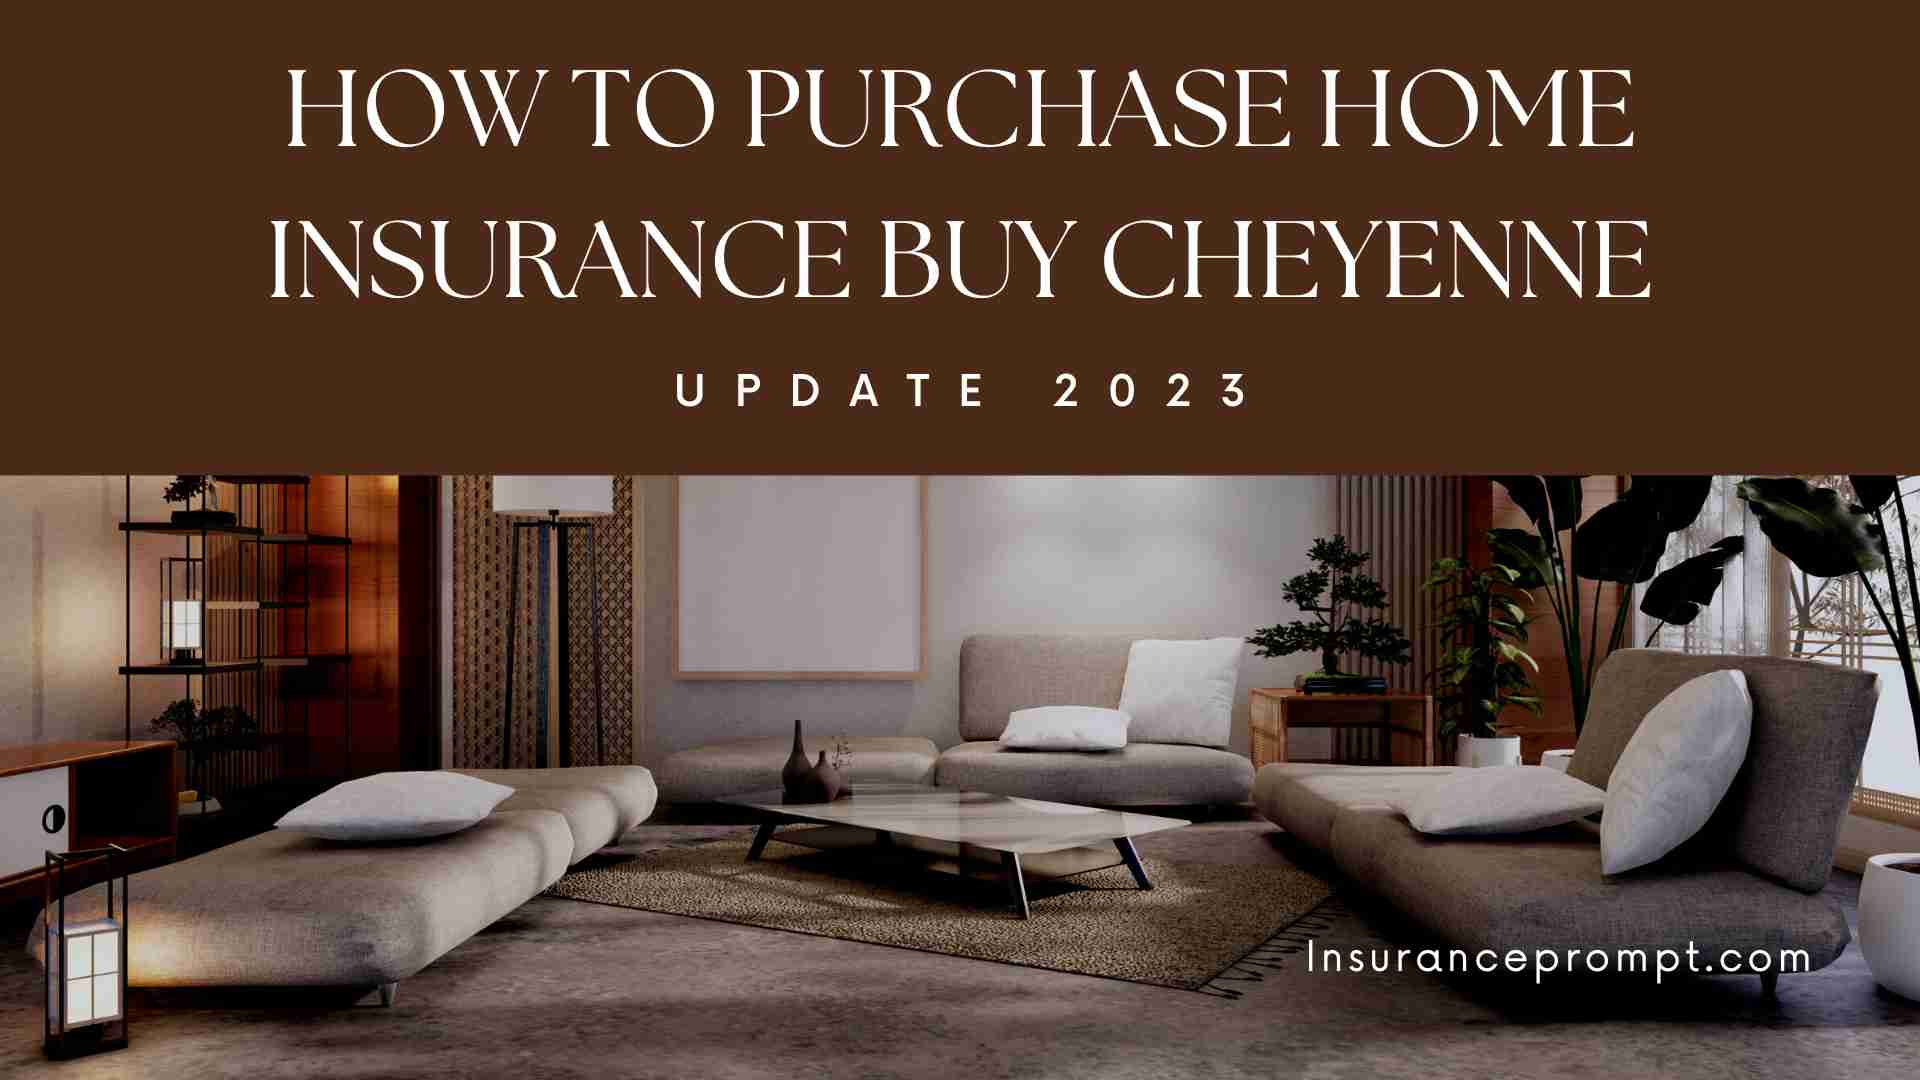 How To Purchase Home Insurance Buy Cheyenne